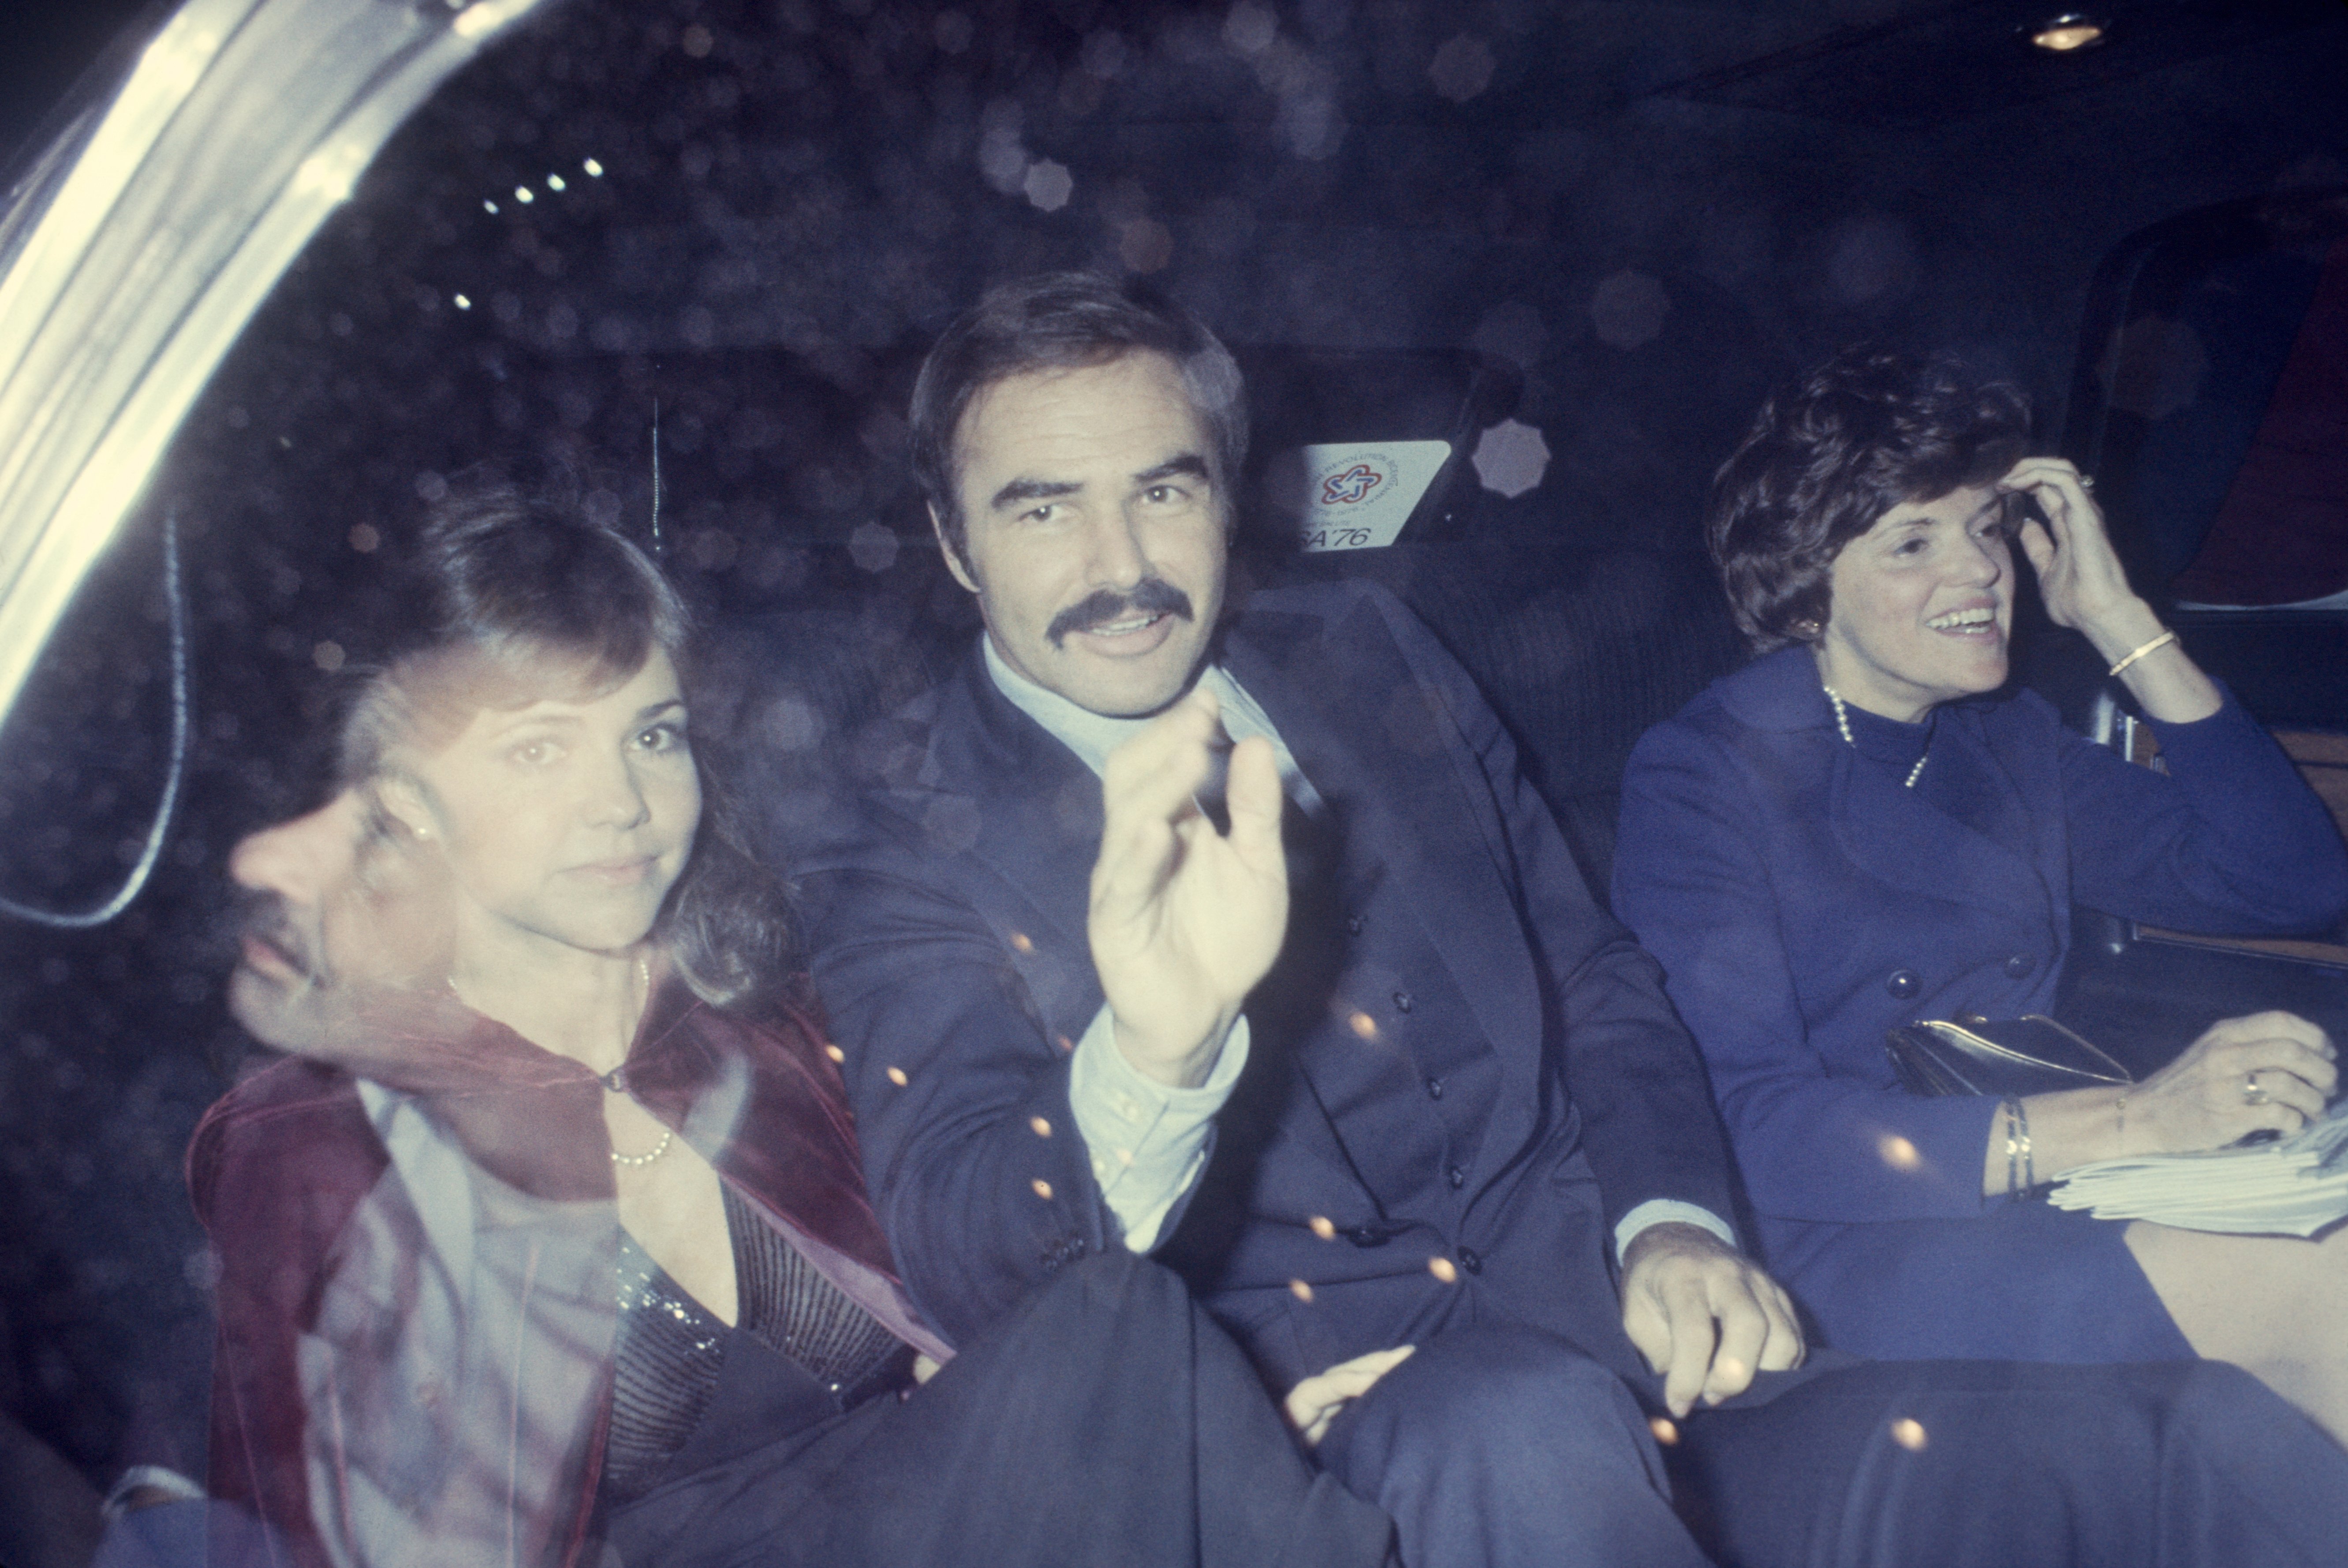 Margaret Field Burt Reynolds and Sally Field in a limousine in 1970, in New York. | Source: Getty Images